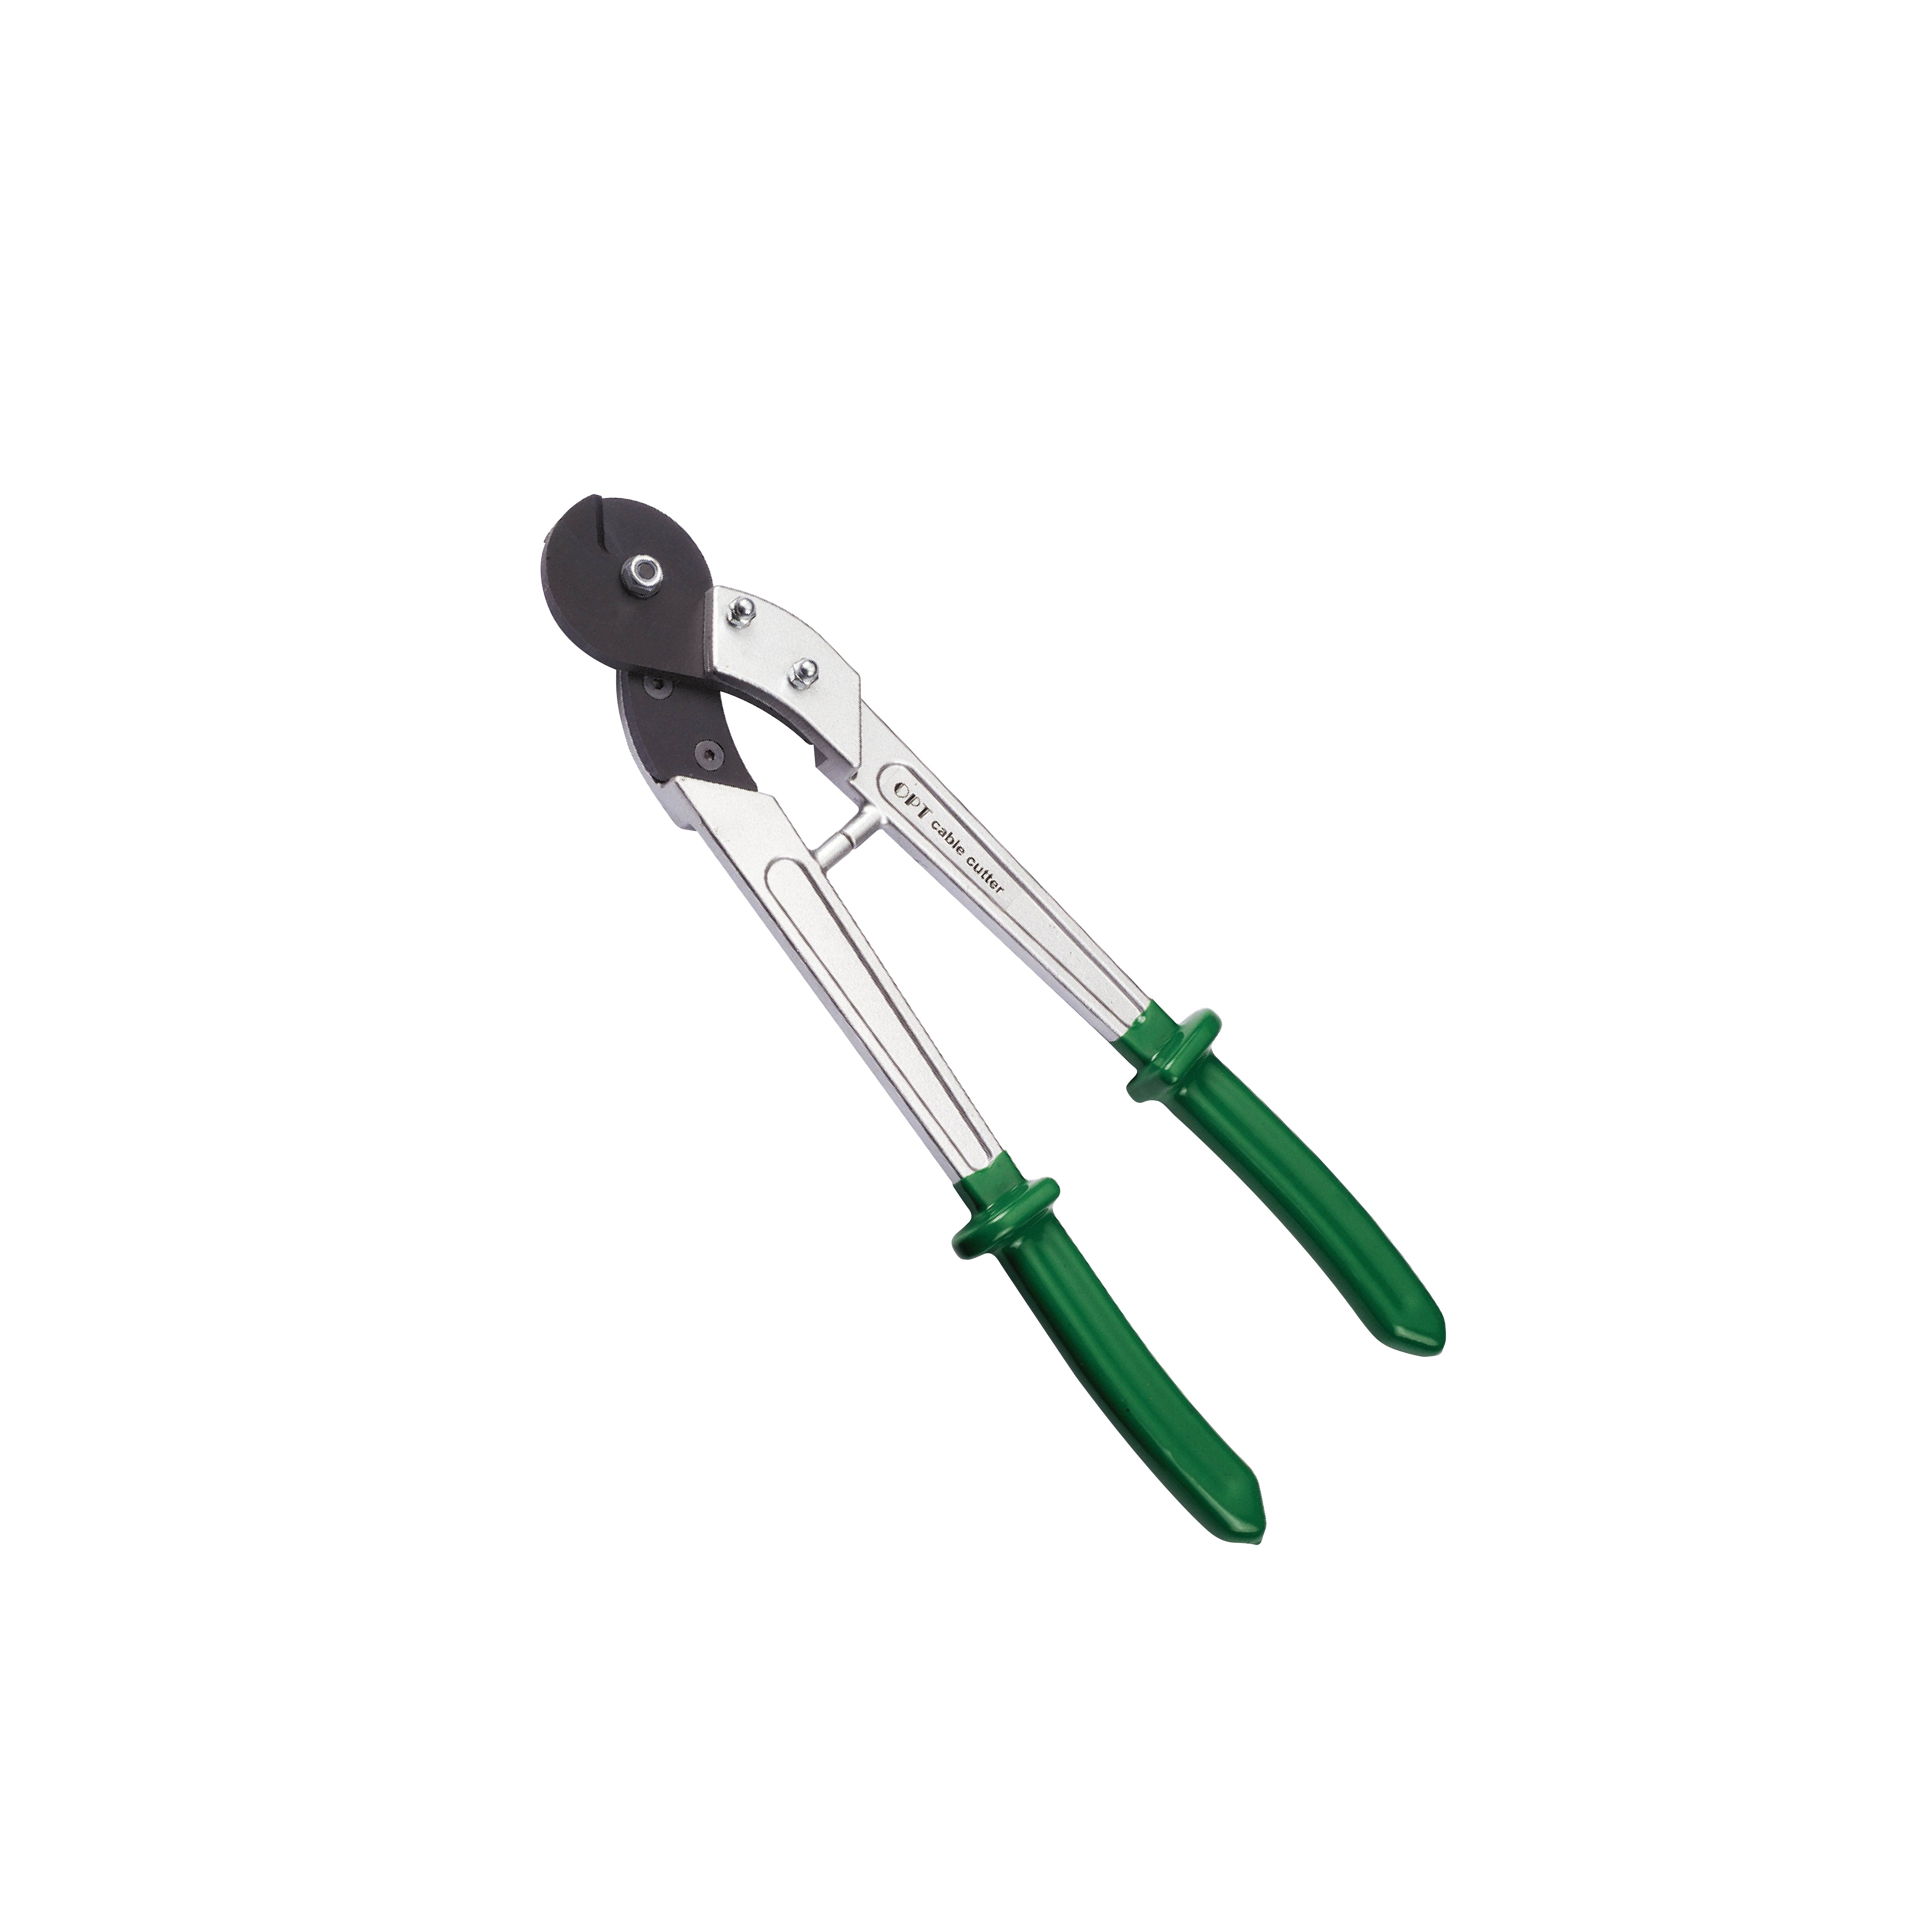 AC-190 HAND CABLE CUTTERS